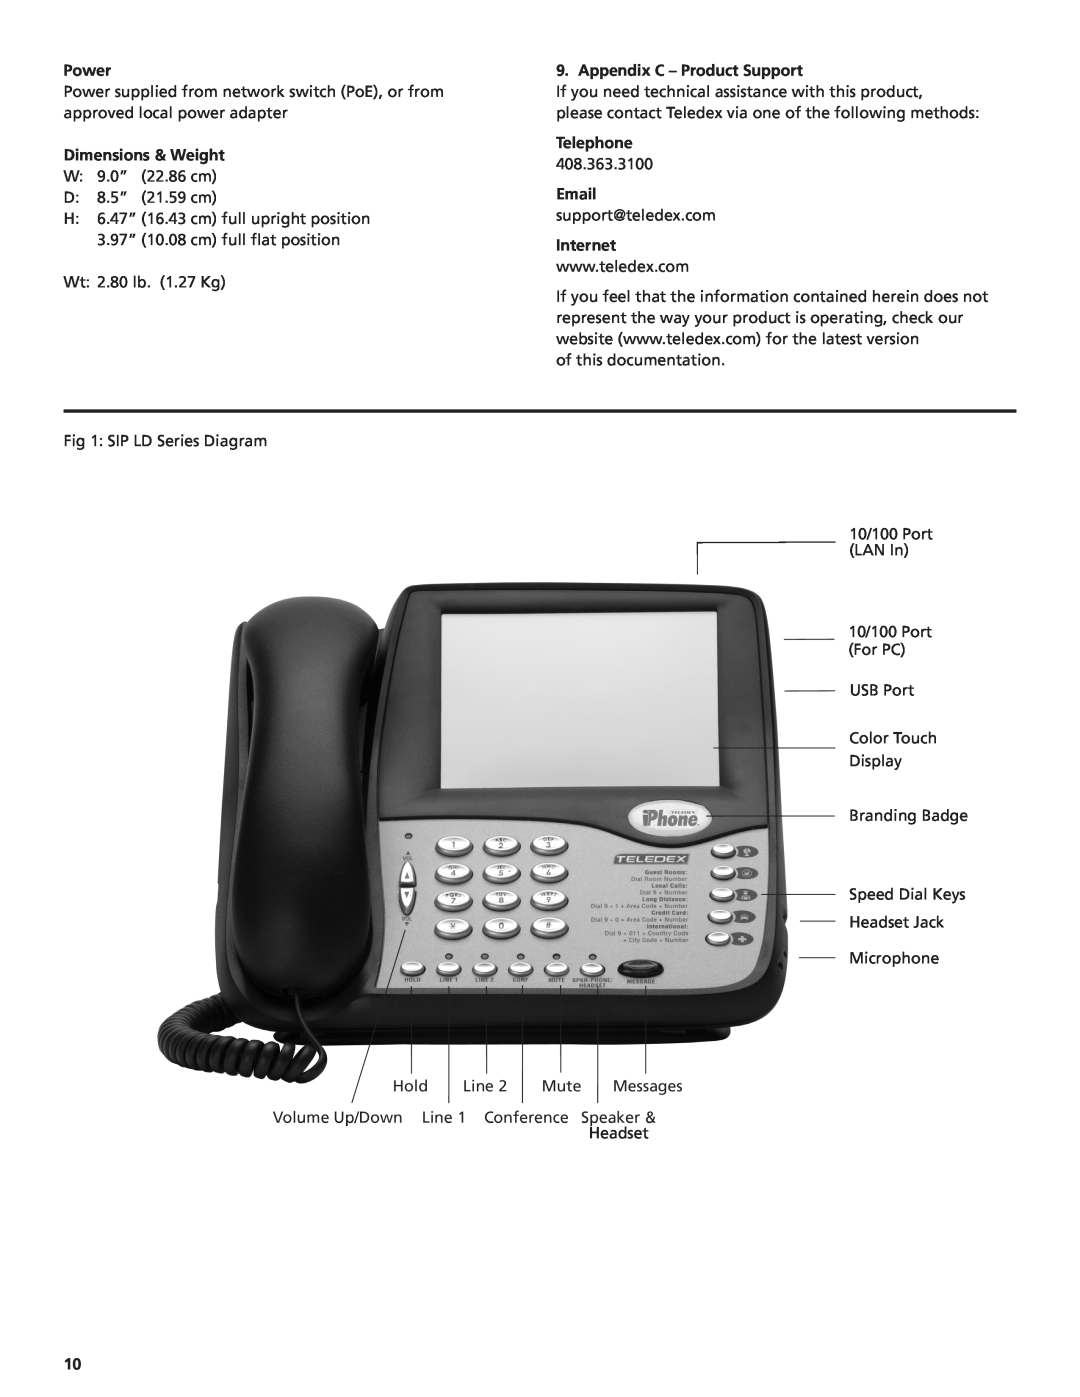 Teledex SIP LD4105S, SIP LD4210S Power, Dimensions & Weight, Appendix C - Product Support, Telephone, Email, Internet 